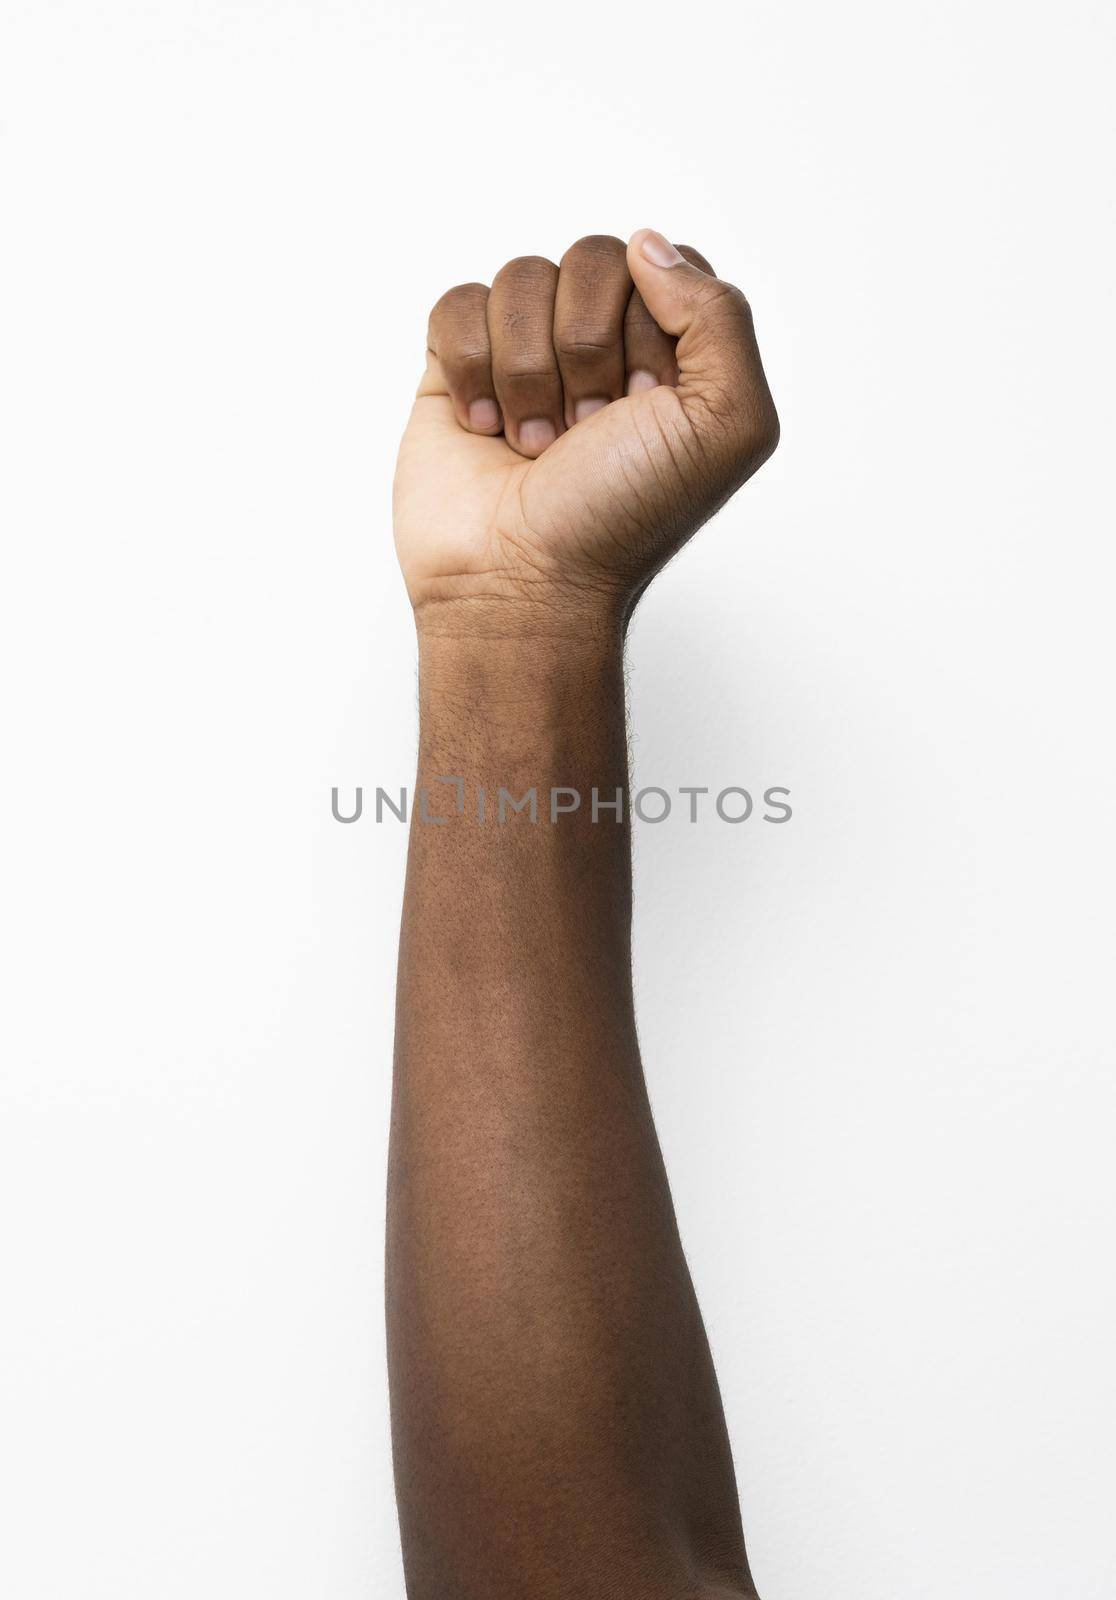 black person holding fist up